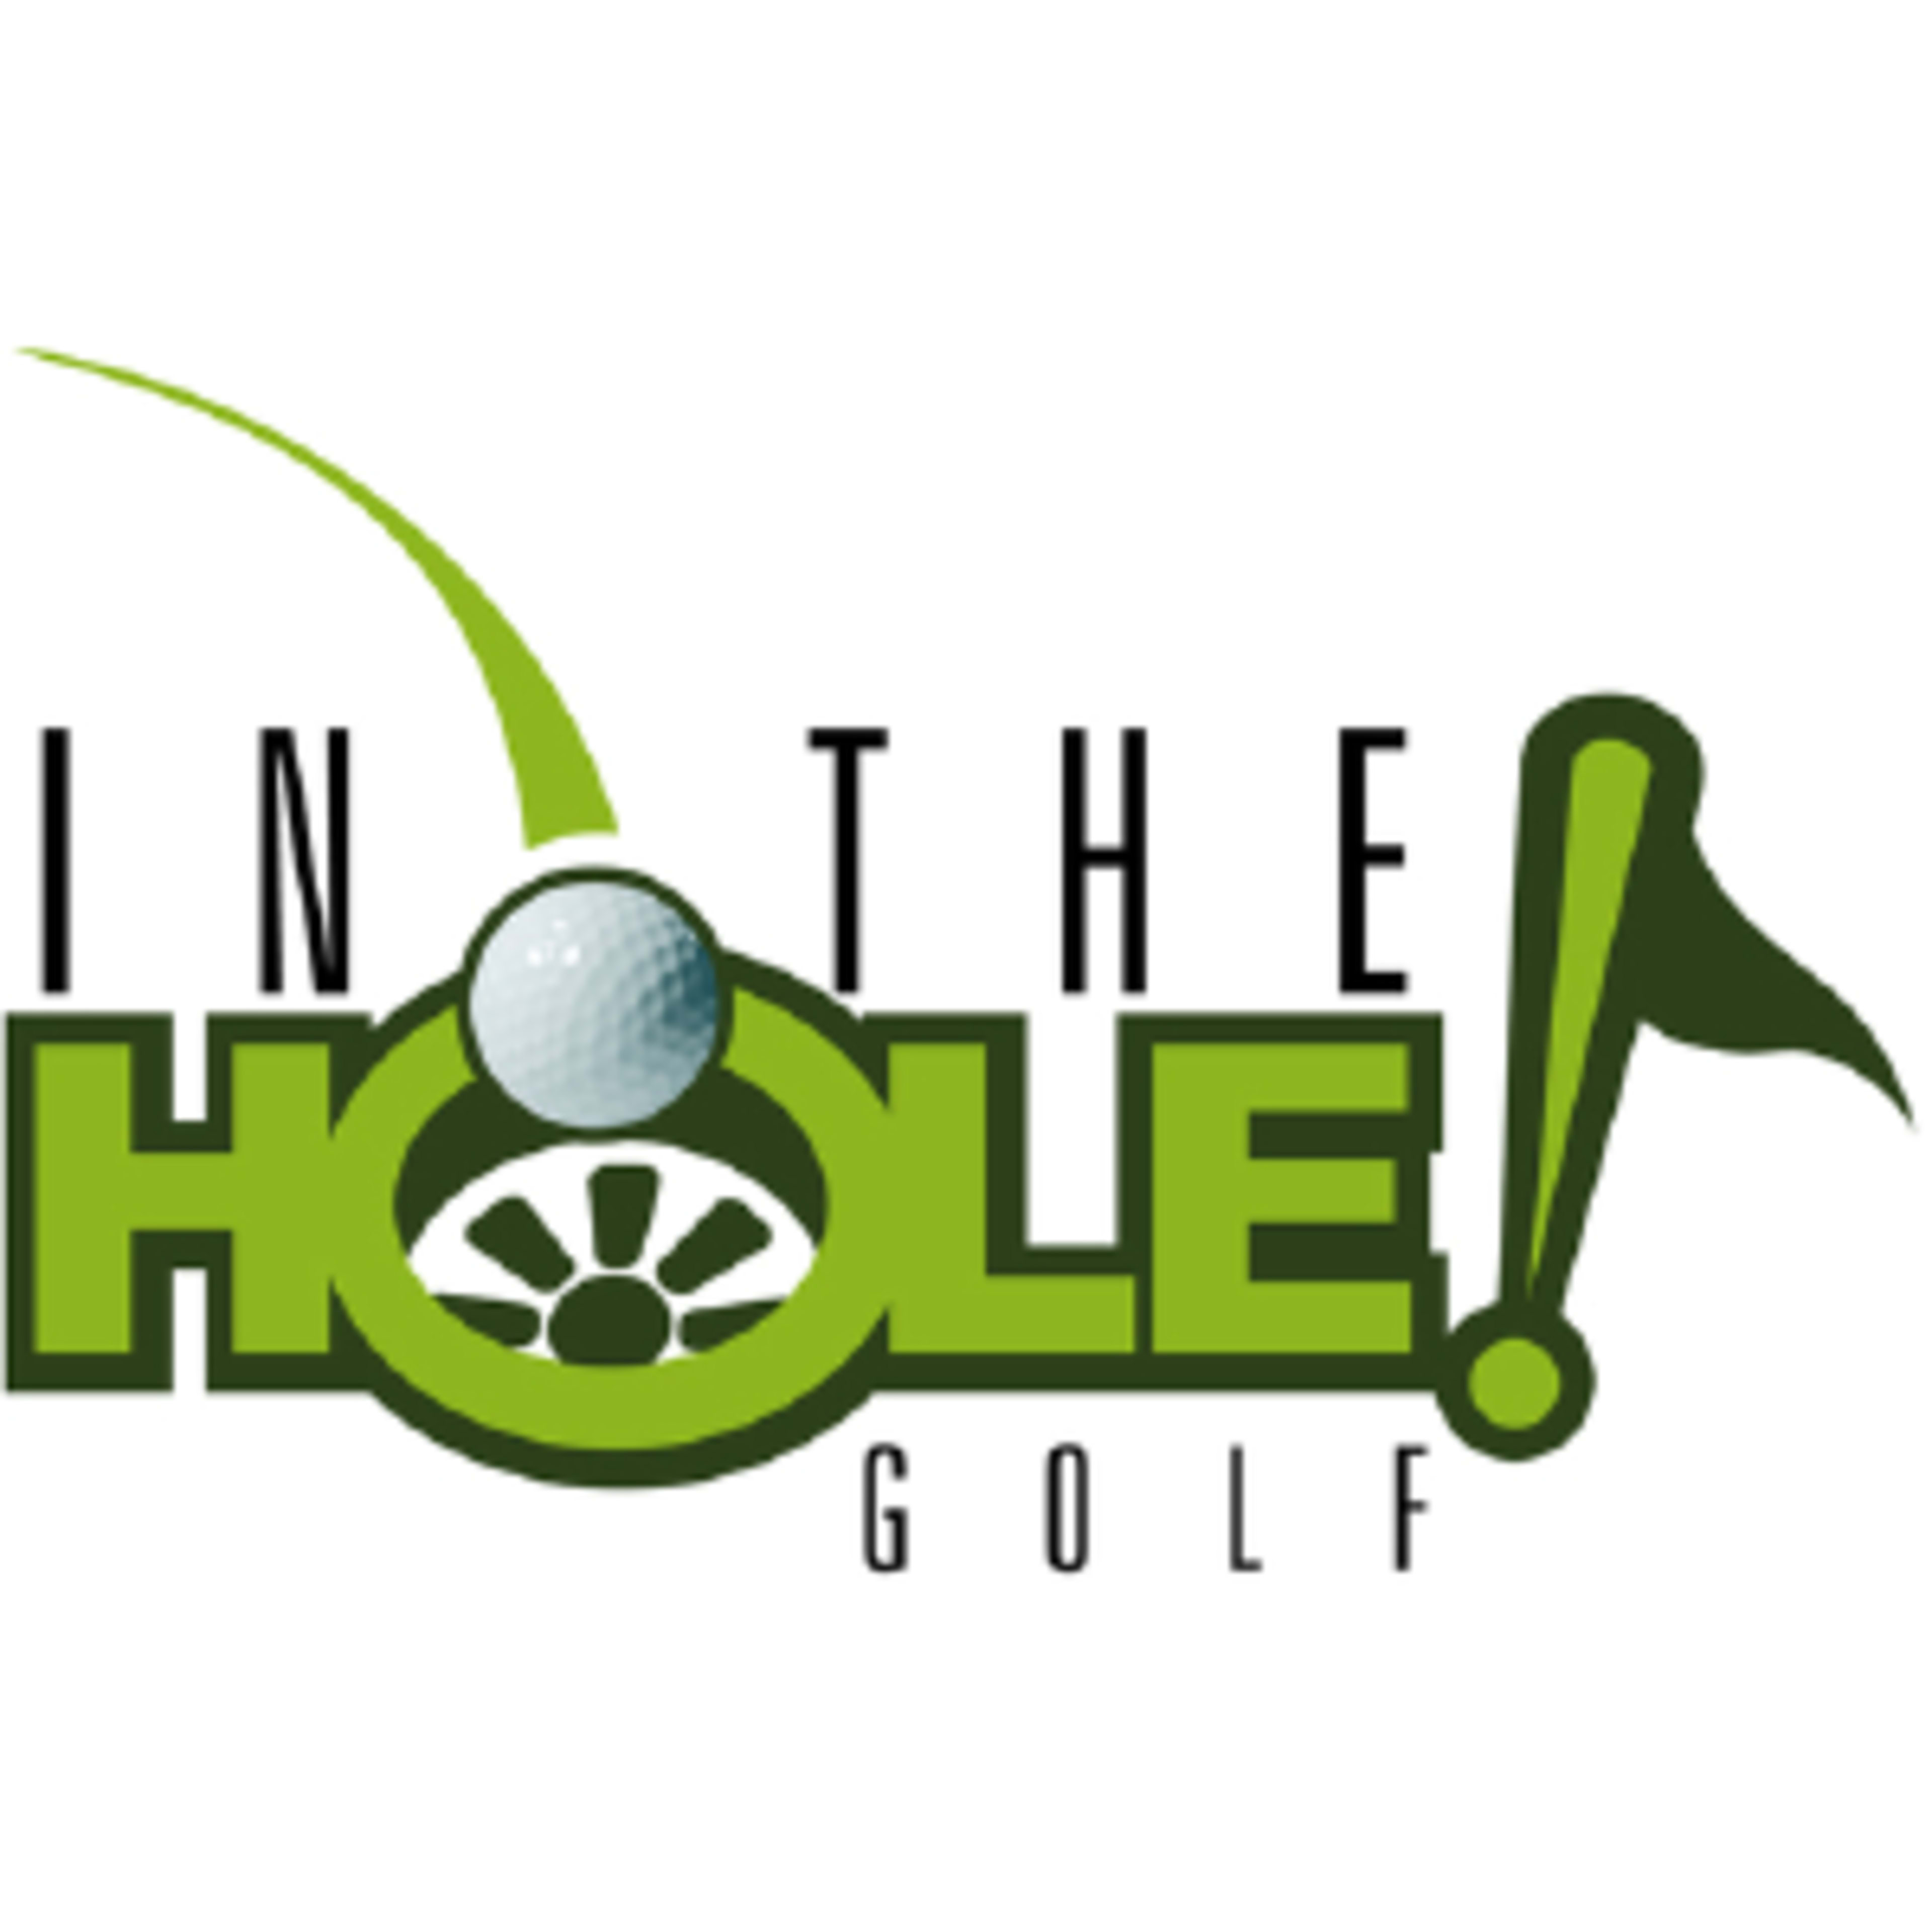 IN THE HOLE! Golf Code